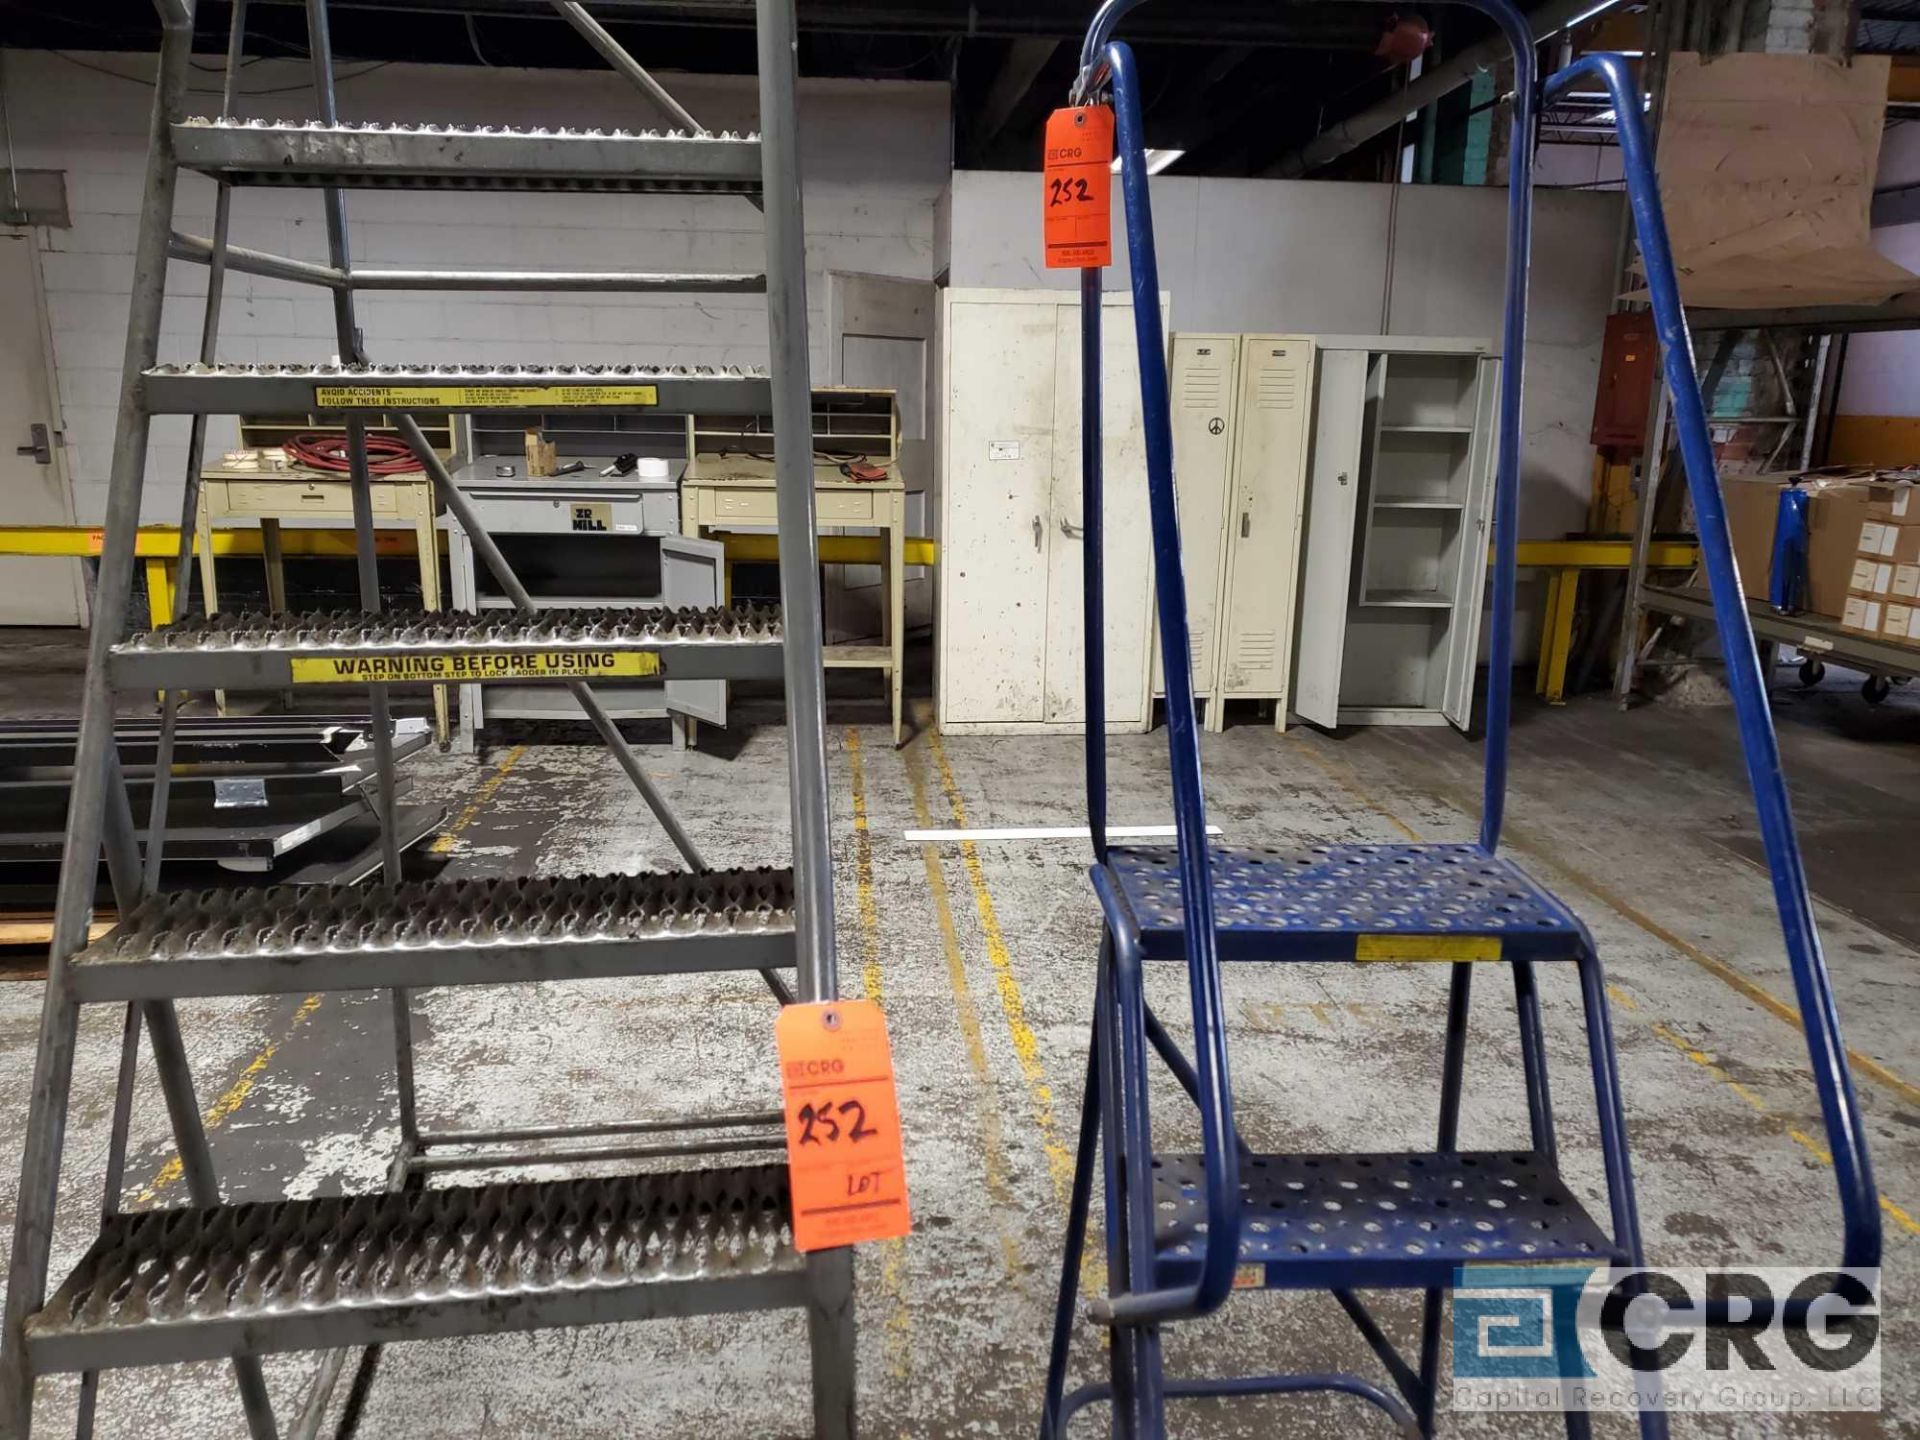 Lot of (3) assorted stock ladders including (1) 10- step, (1) 7- step (near annealing area, (1) 4- - Image 3 of 3